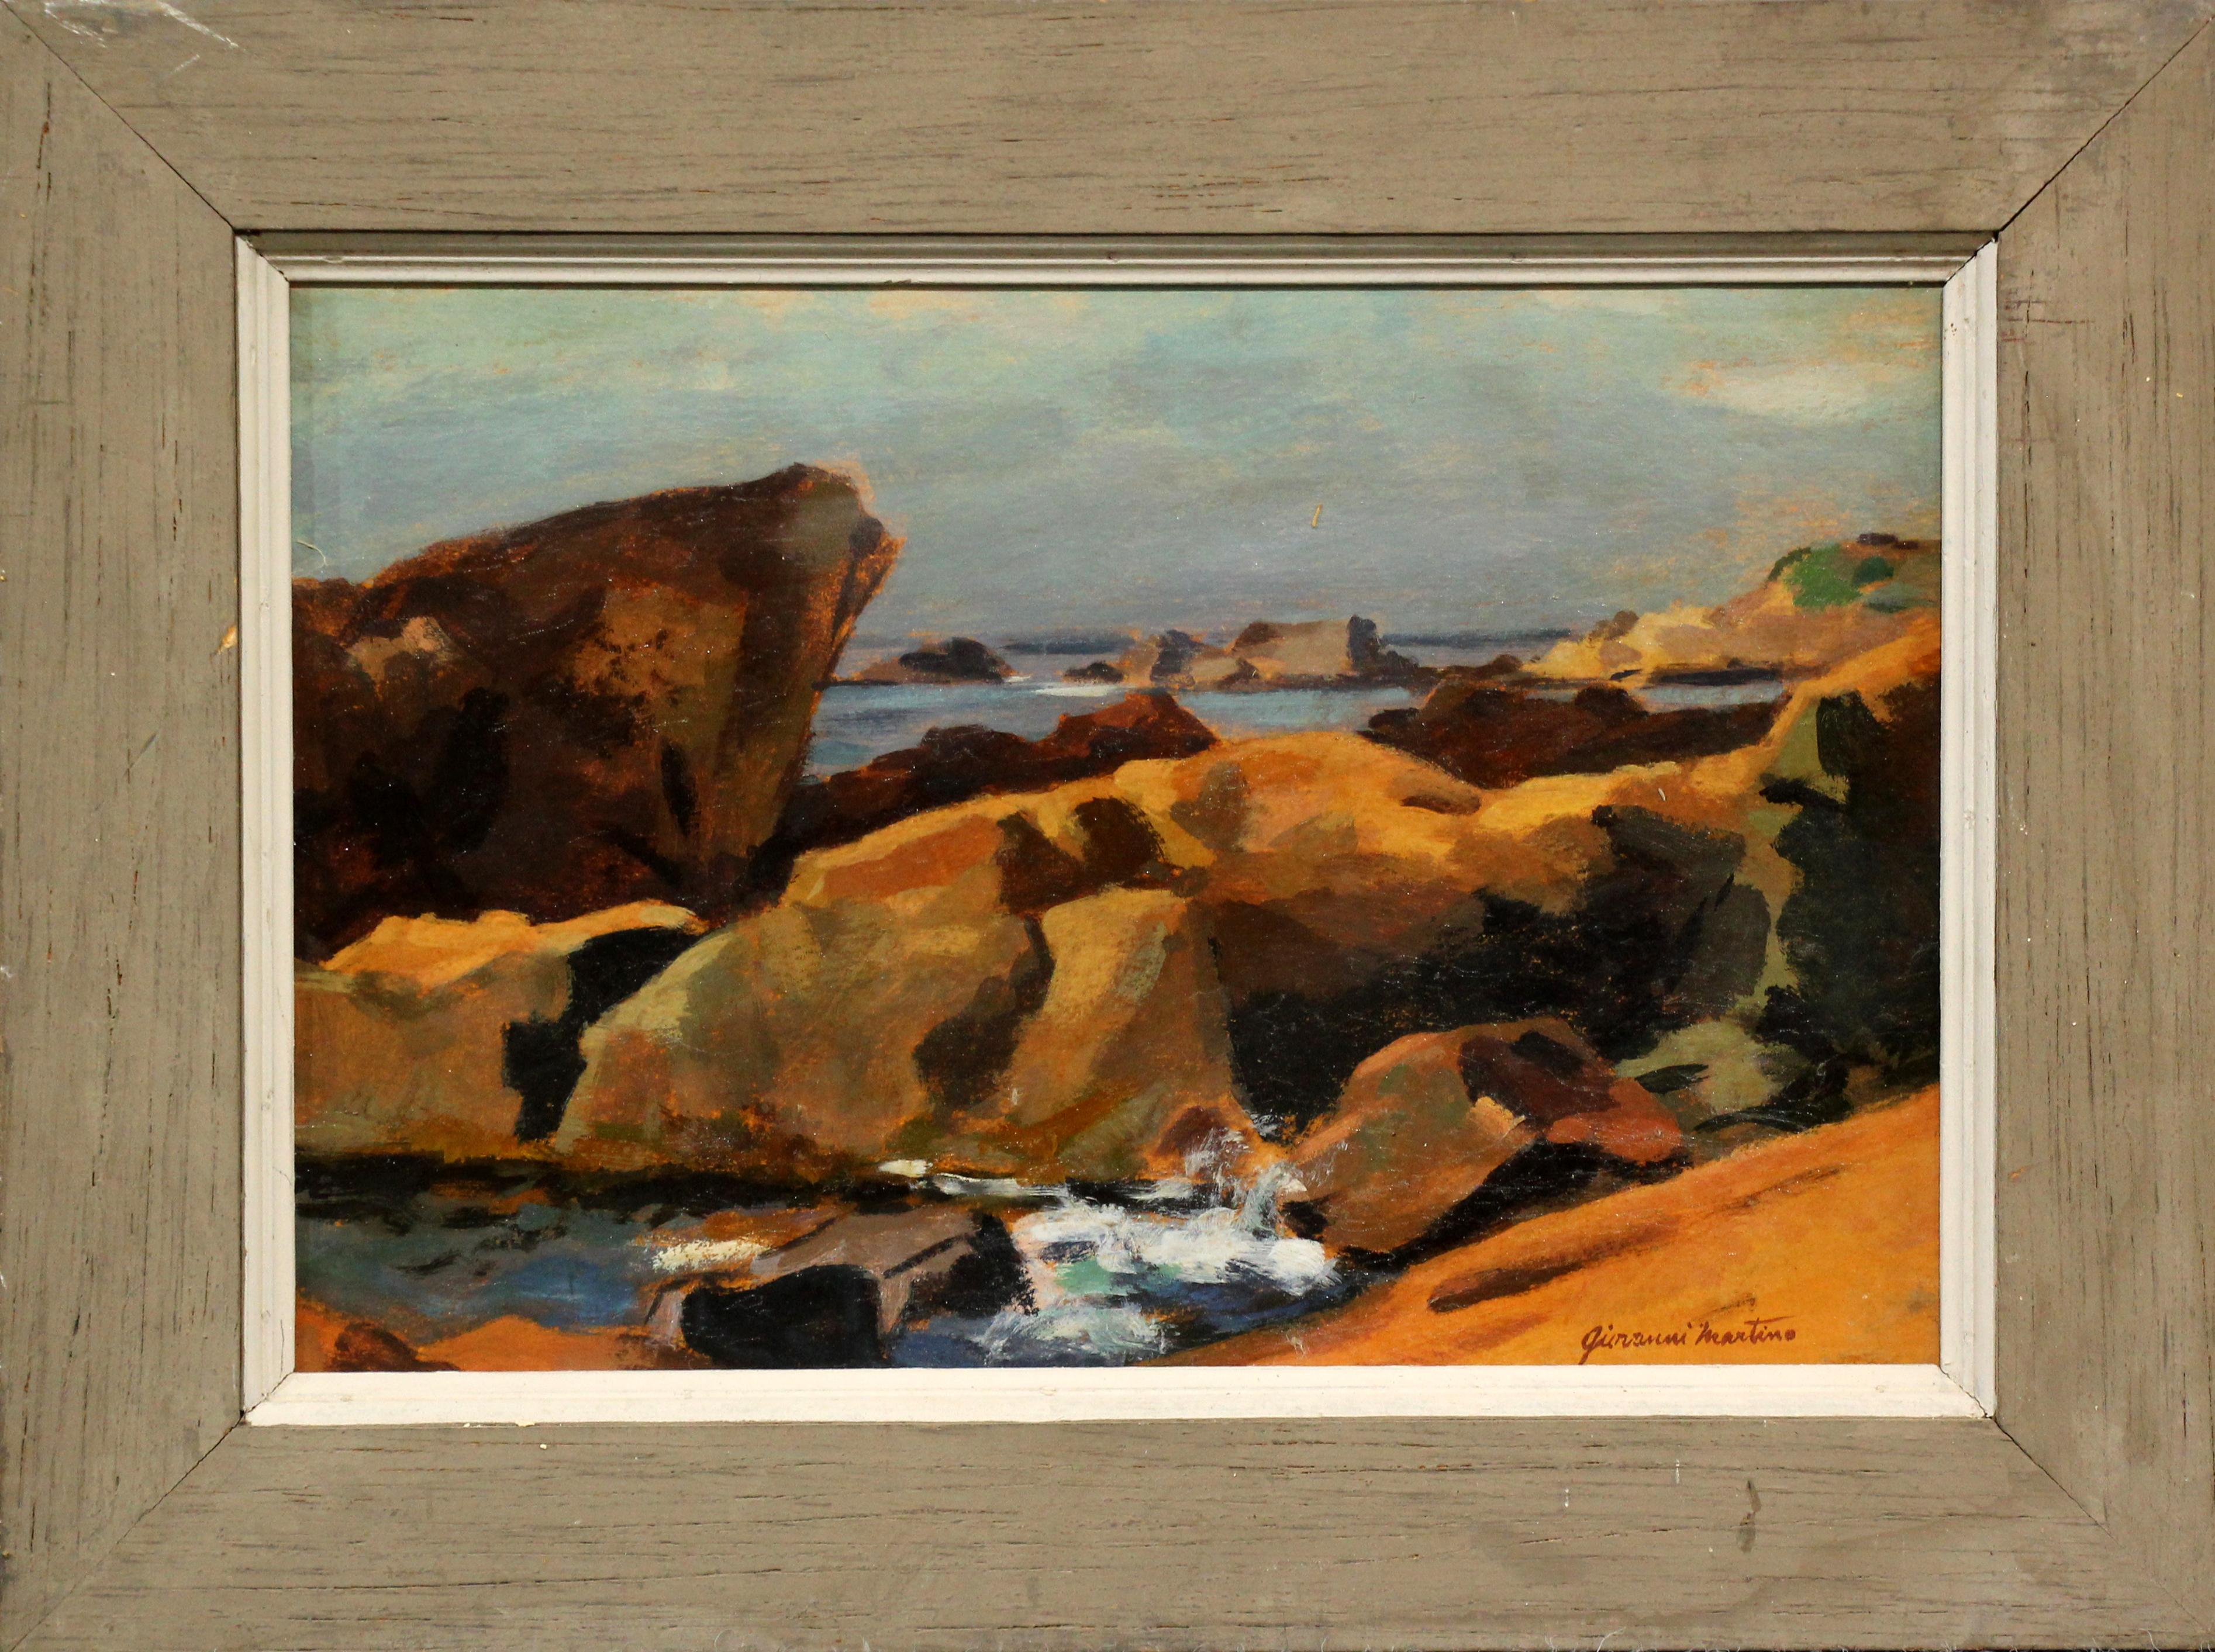 New England Rocks, Seascape by Pennsylvania Impressionist - Painting by Giovanni Martino